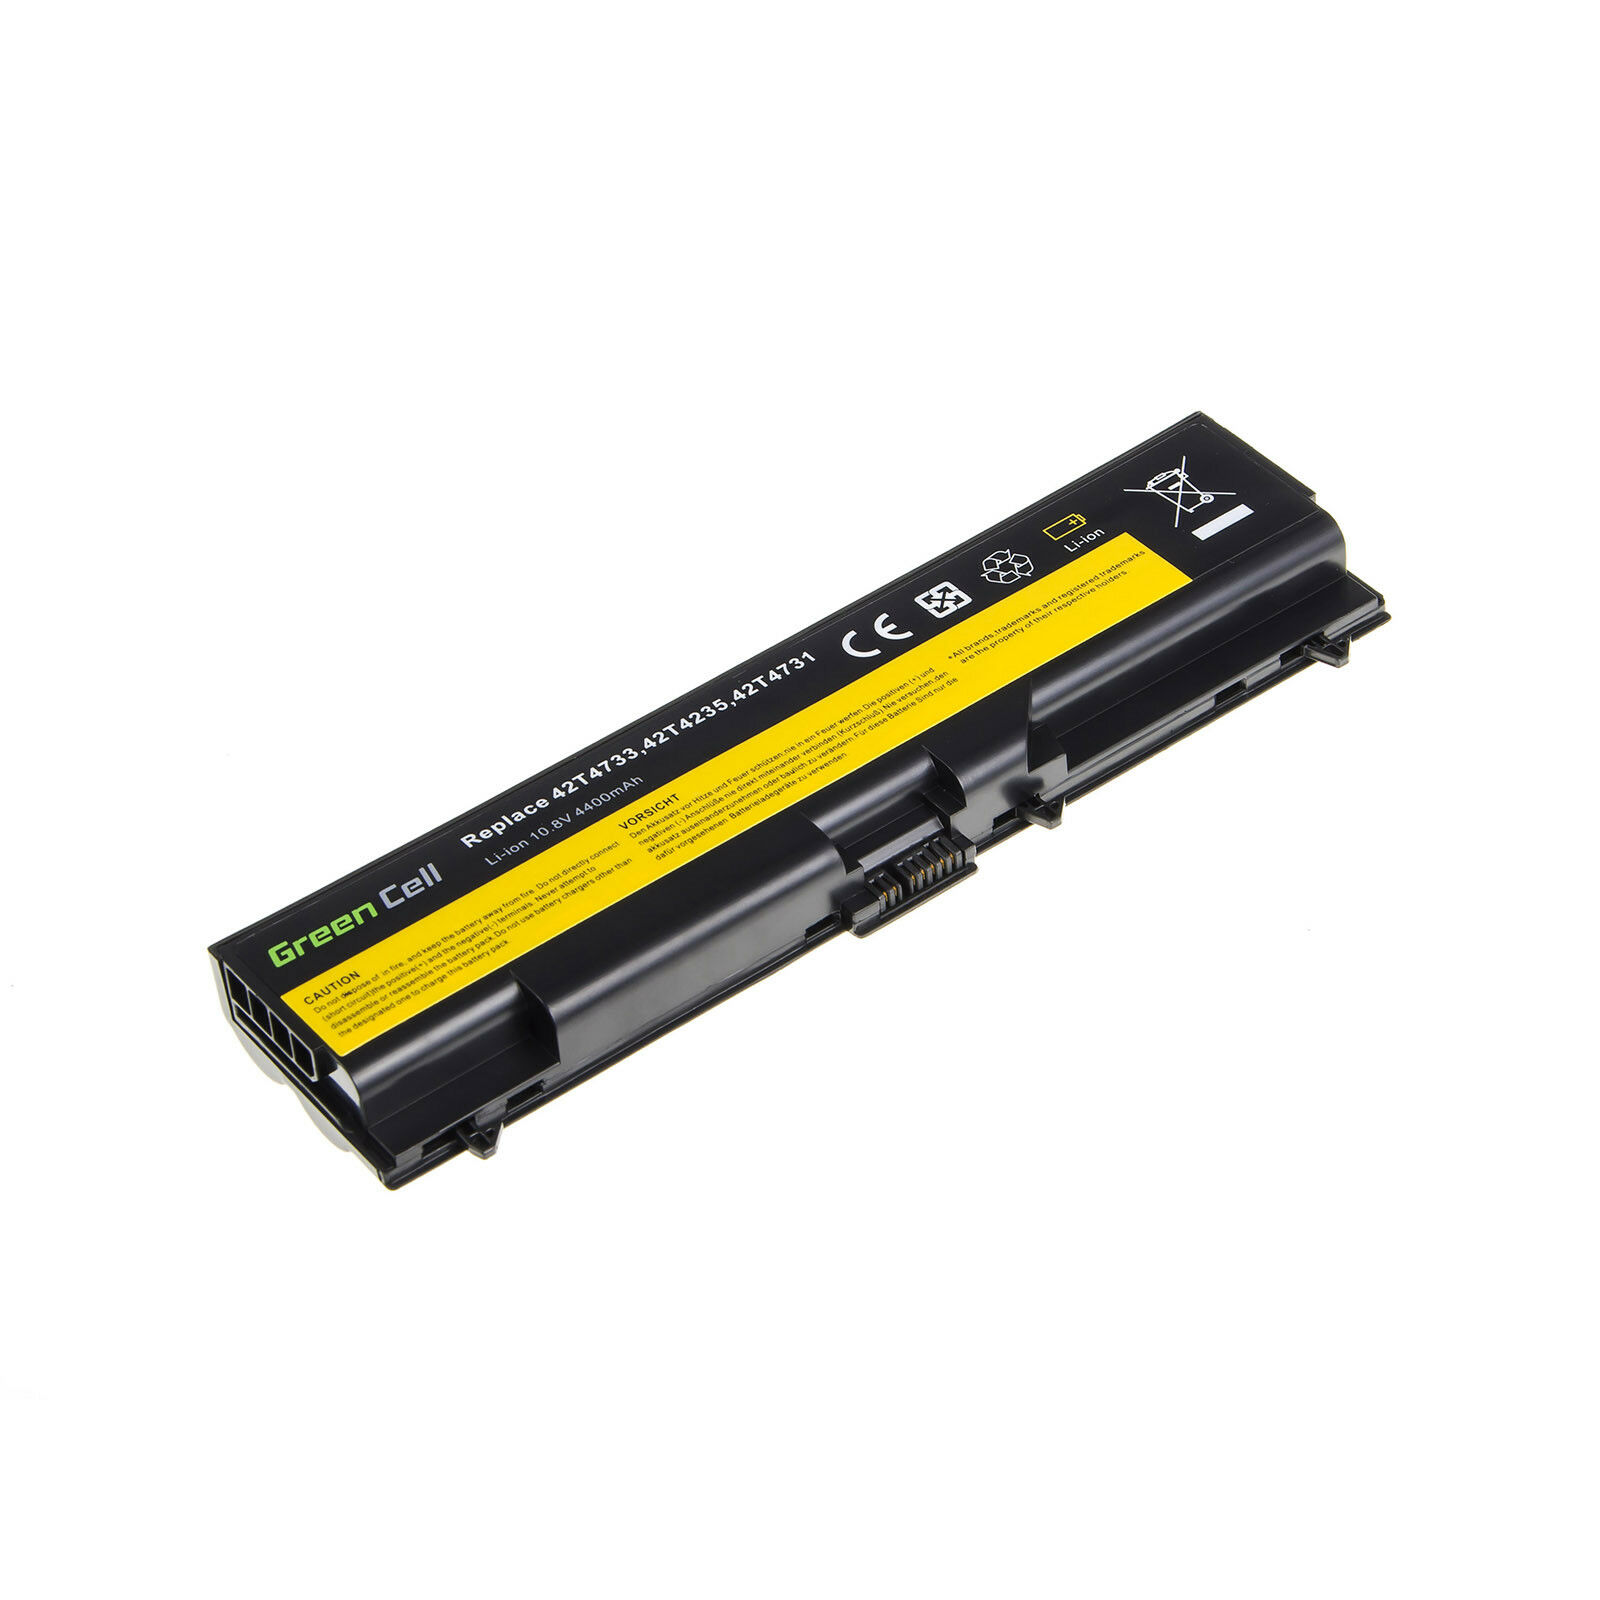 Lenovo Thinkpad T530 T430 W530 L530 L430 42T4235 57Y4186 0A36302 compatible battery